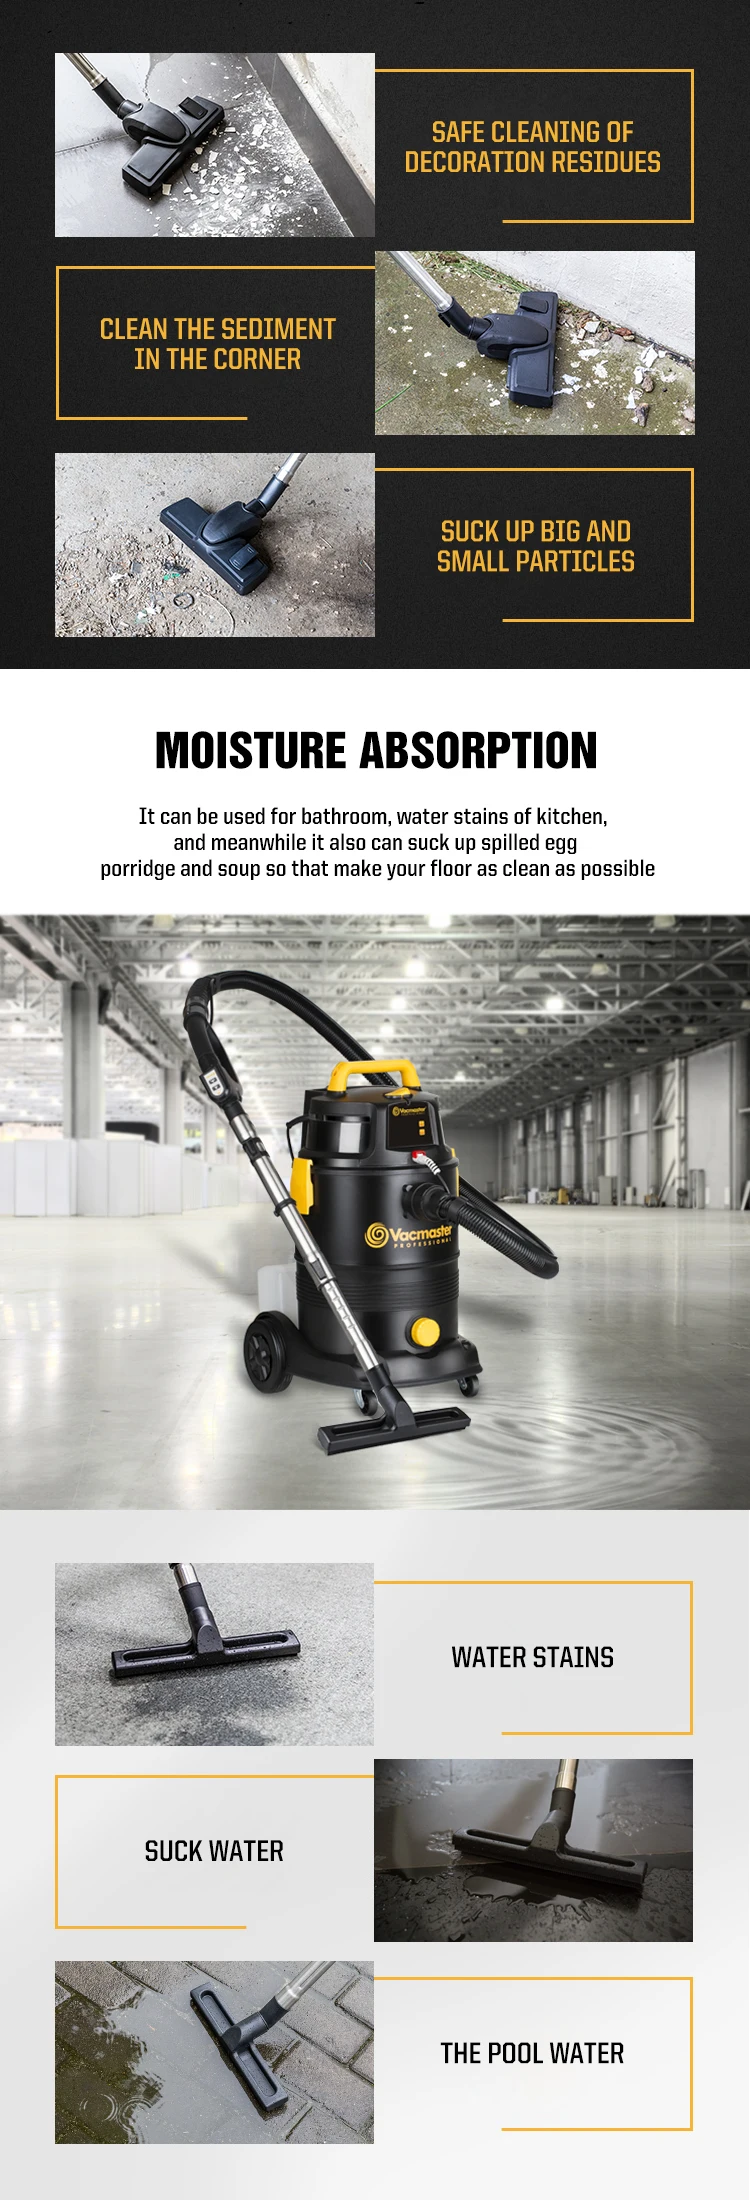 Vacmaster 4 in 1 multi-function 1300W 30L remote control car wash shampoo home carpet use vacuum cleaner - VK1330PWDR